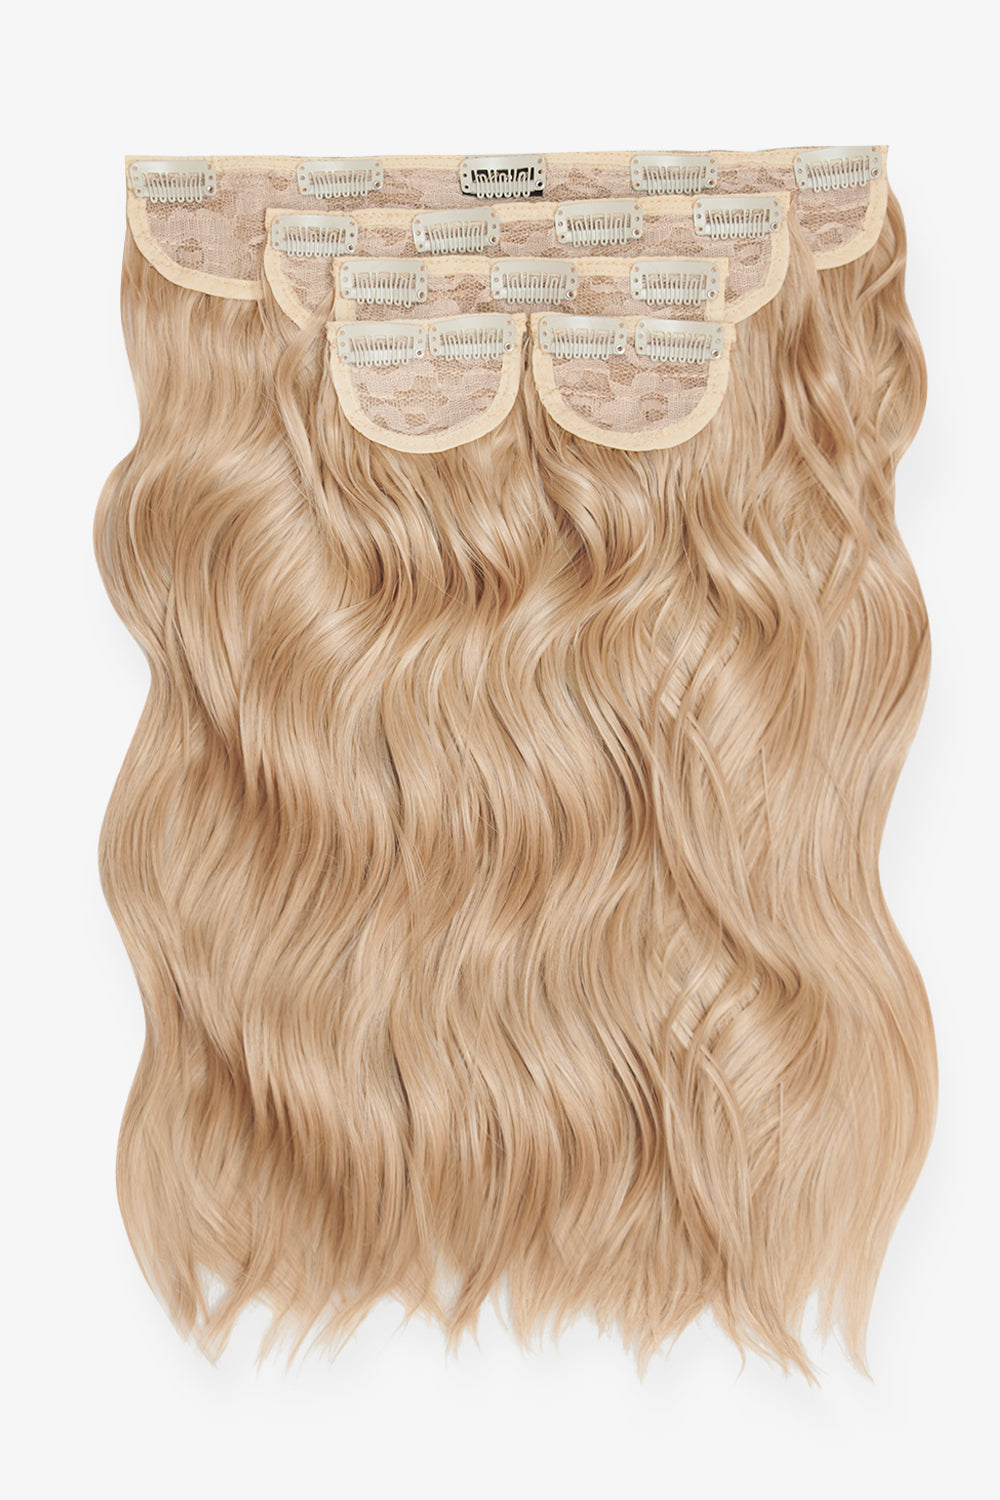 Super Thick 16’’ 5 Piece Brushed Out Wave Clip In Hair Extensions + Hair Care Bundle - Honey Blonde